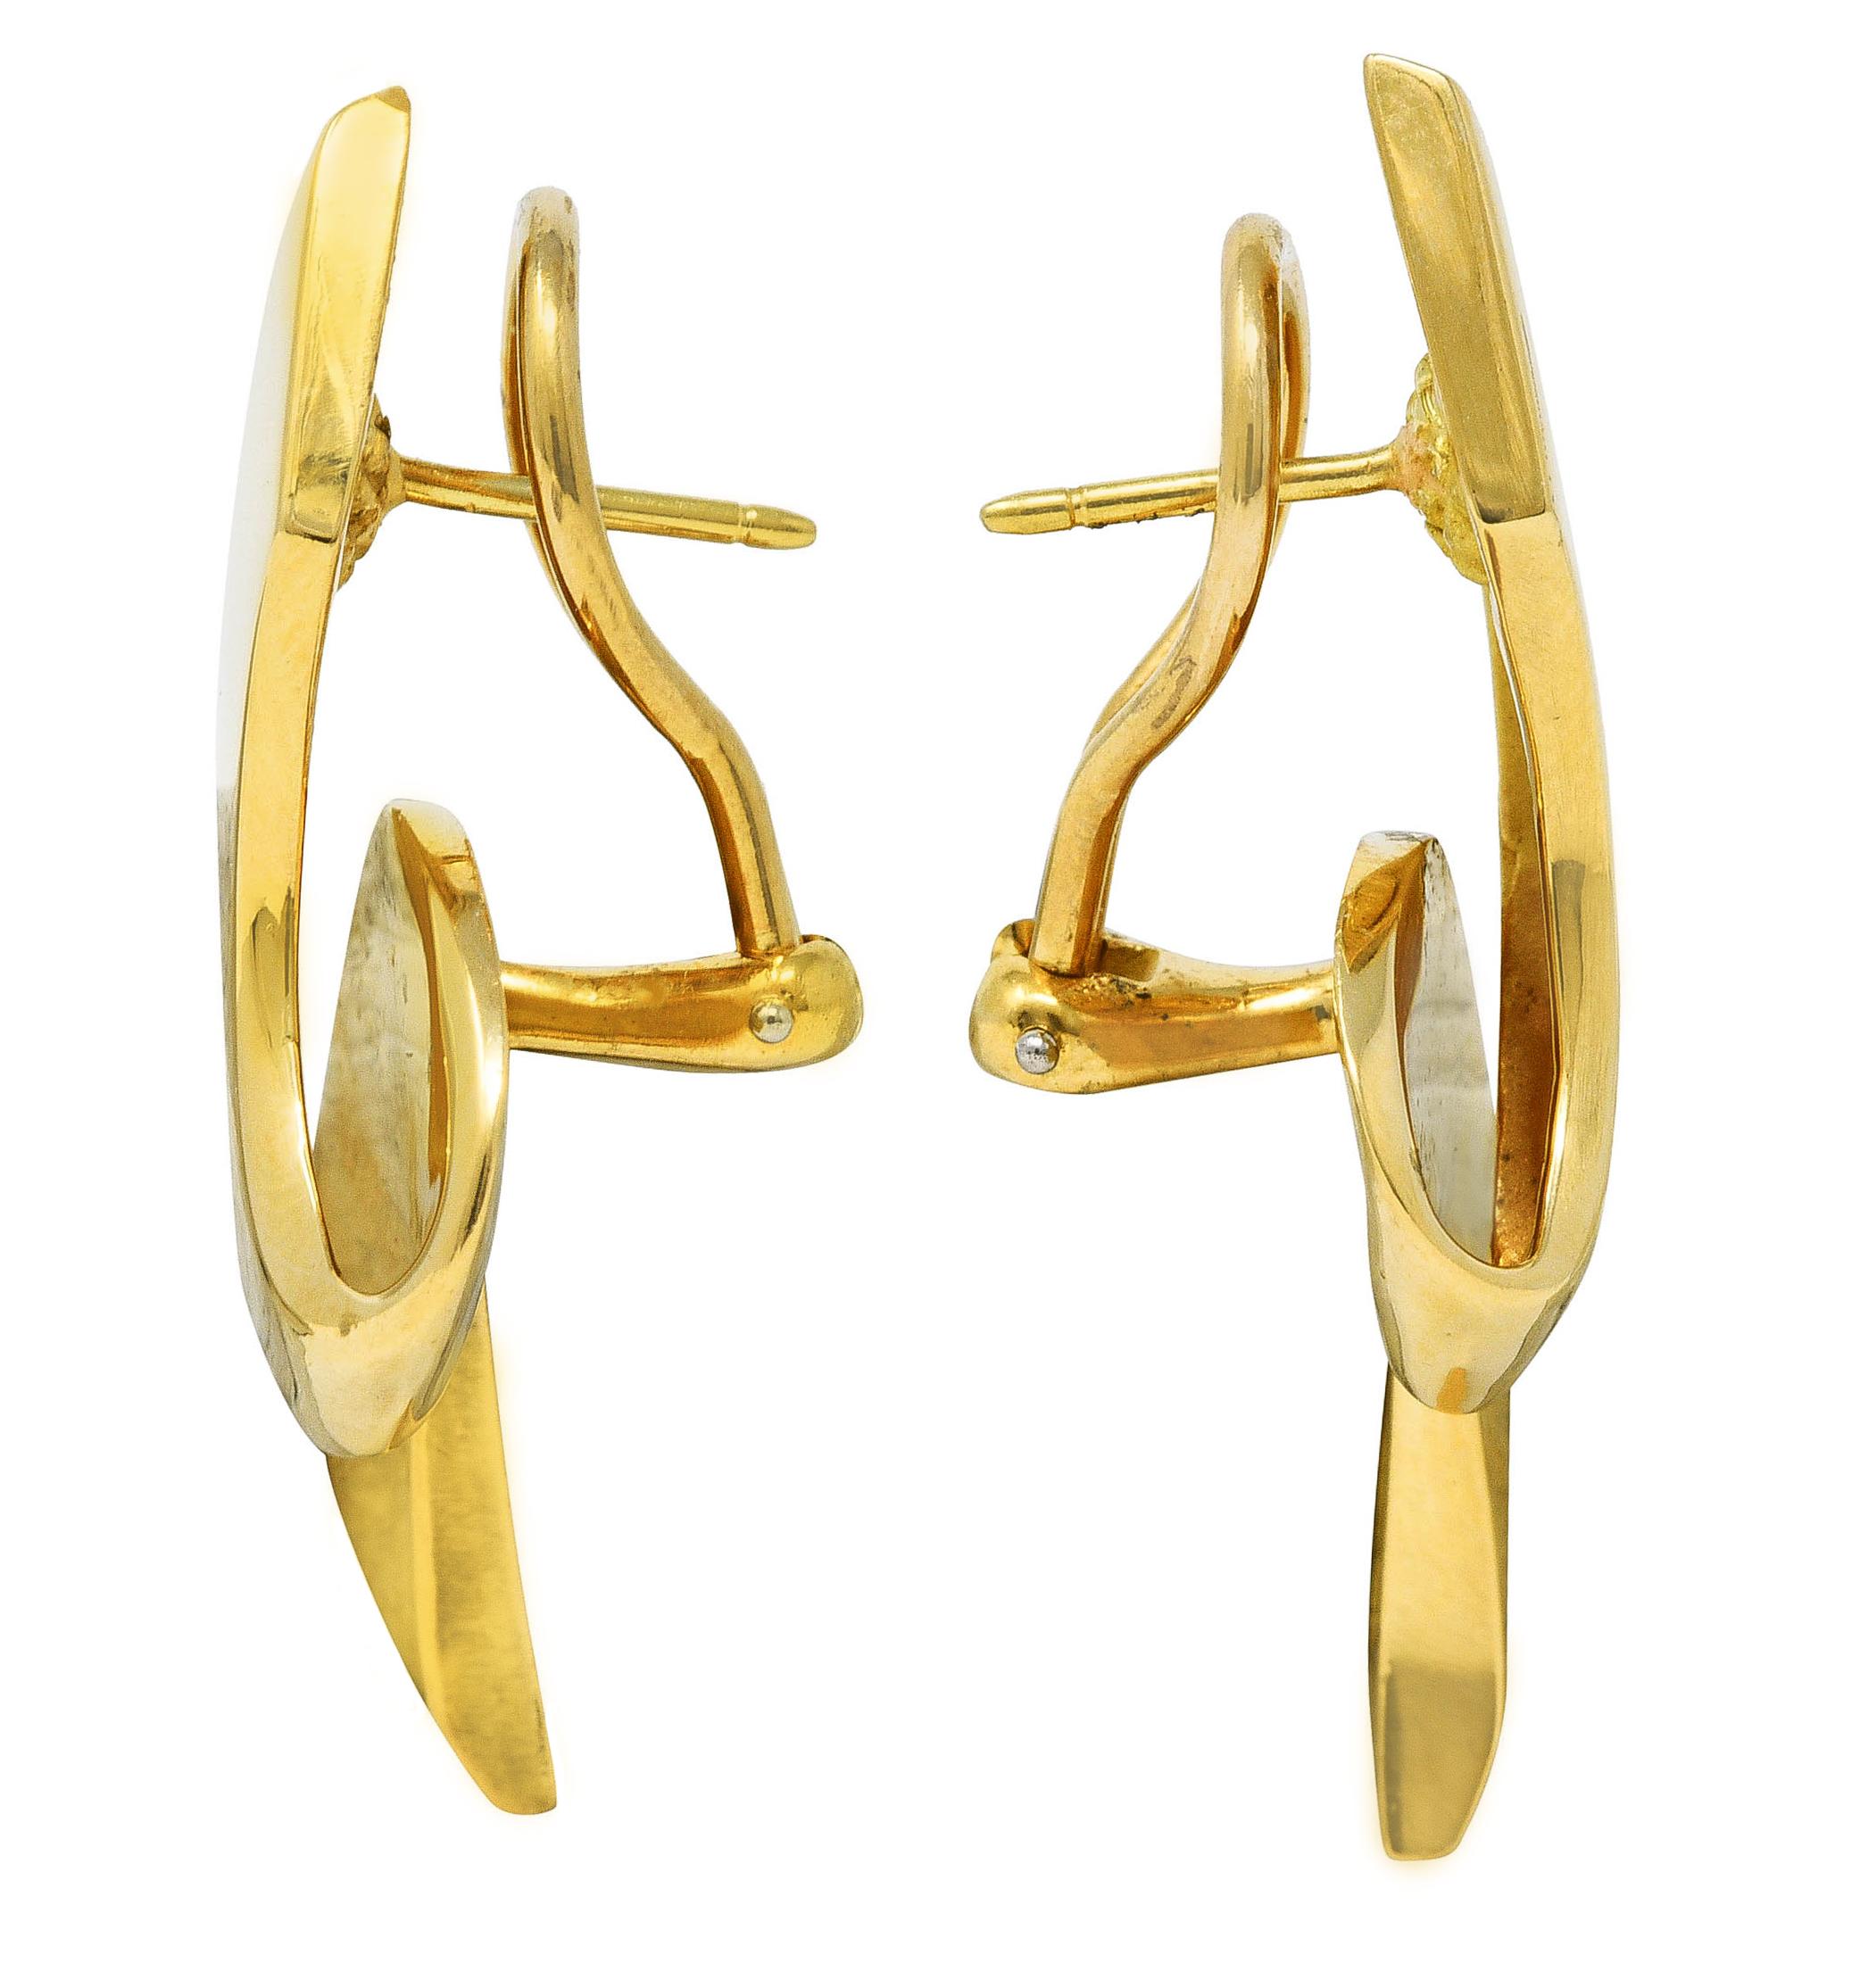 Earrings are designed as looping ribbon motif

With high polished gold finish

Completed by posts with hinged omega backs

Tested as 18 karat gold

Fully signed Paloma Picasso Tiffany & Co.

Circa: Stamped 1985 from the Ribbon collection

Measures: